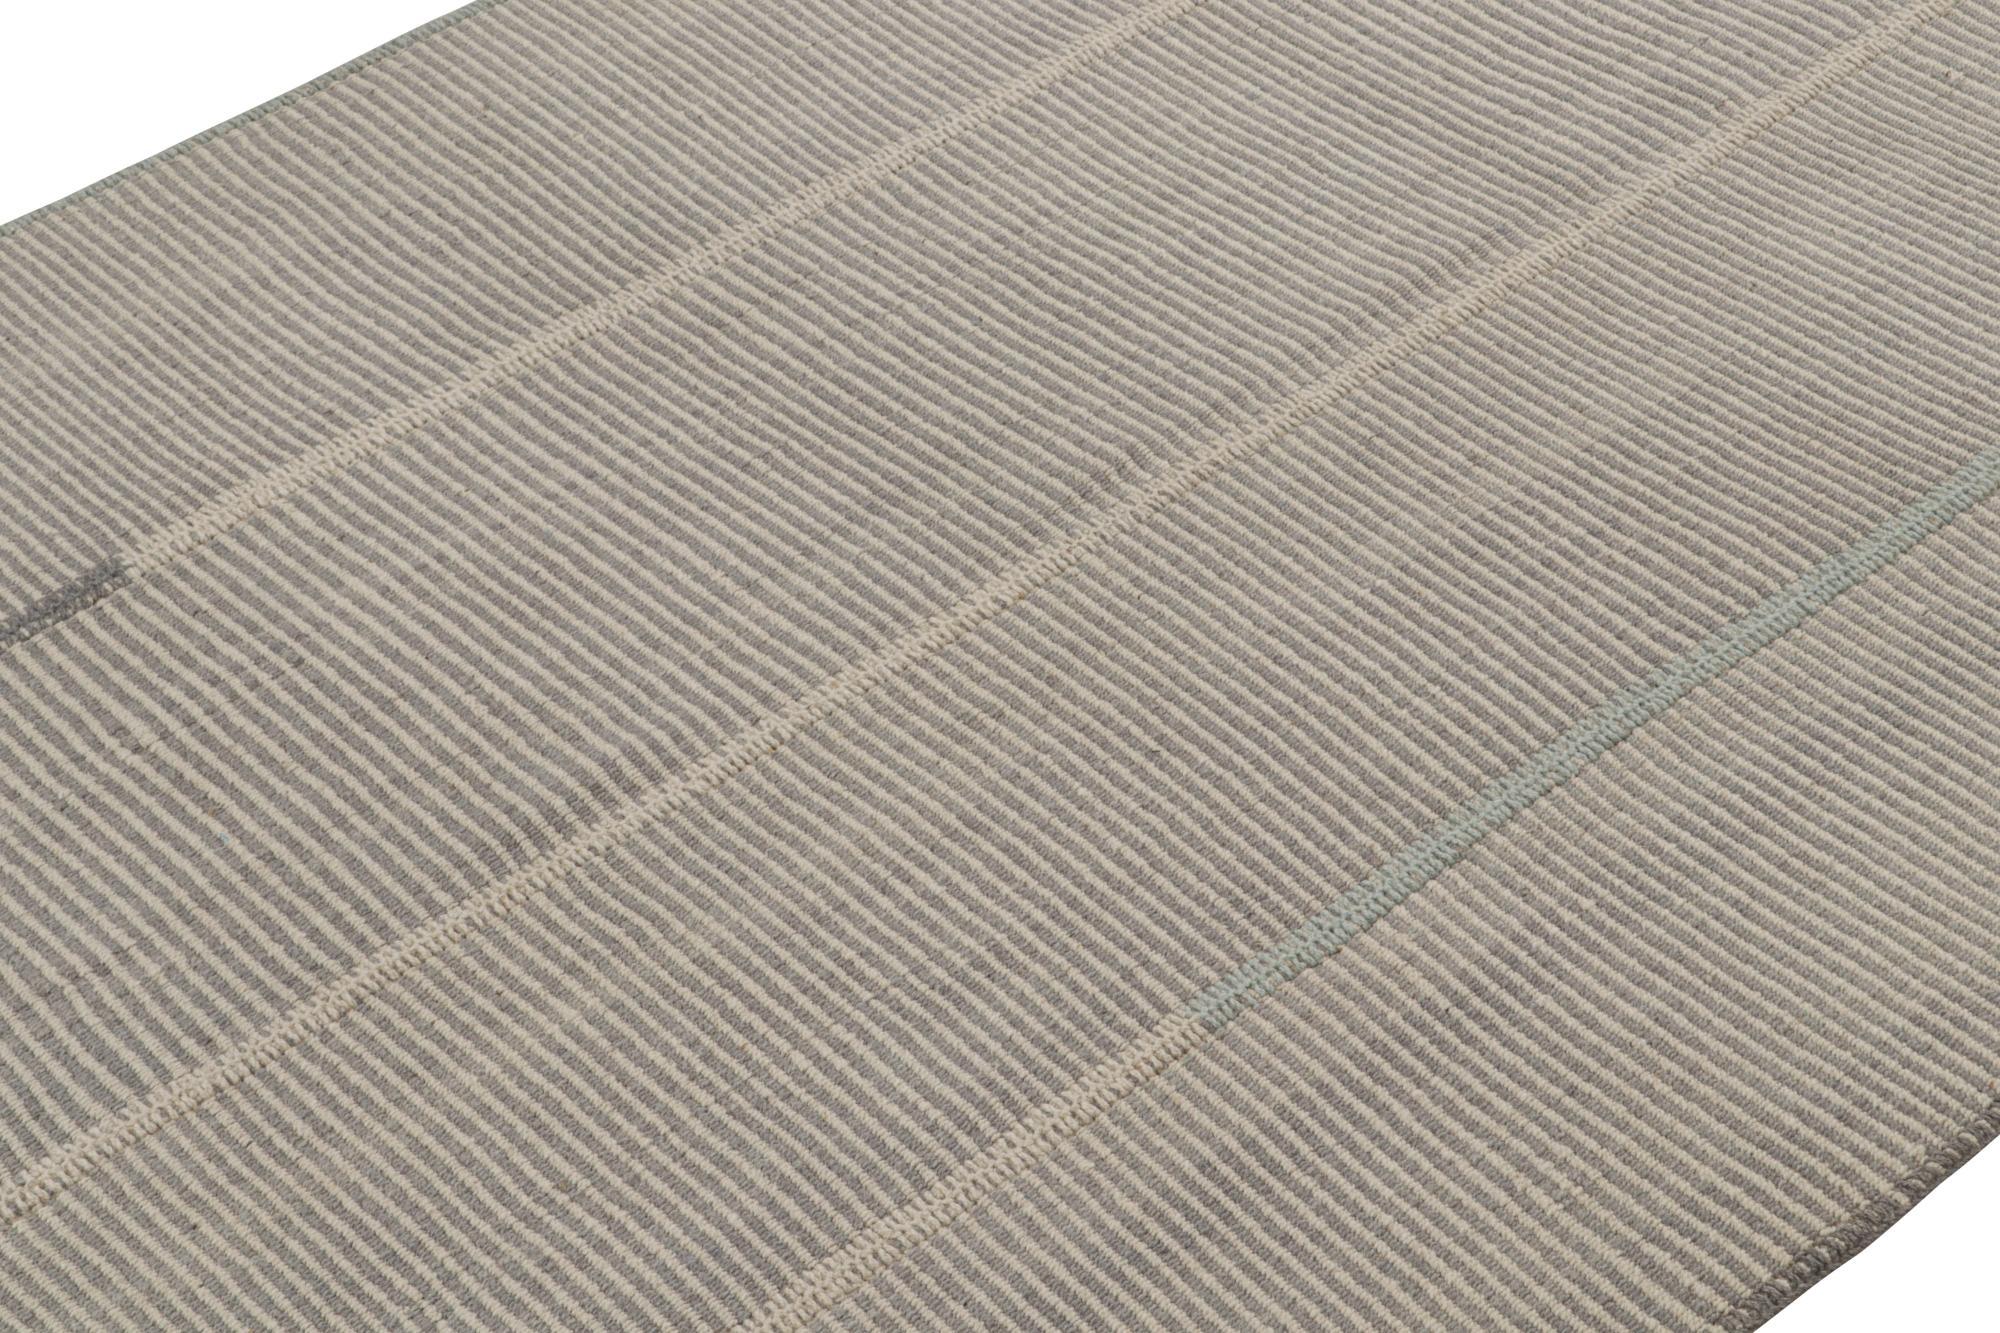 Handwoven in wool, this 6x9 Kilim is from an inventive new contemporary flat weave collection by Rug & Kilim.

On the Design:

Fondly dubbed, “Rez Kilims”, this modern take on classic panel-weaving enjoys a modern take on Persian panel weaving.